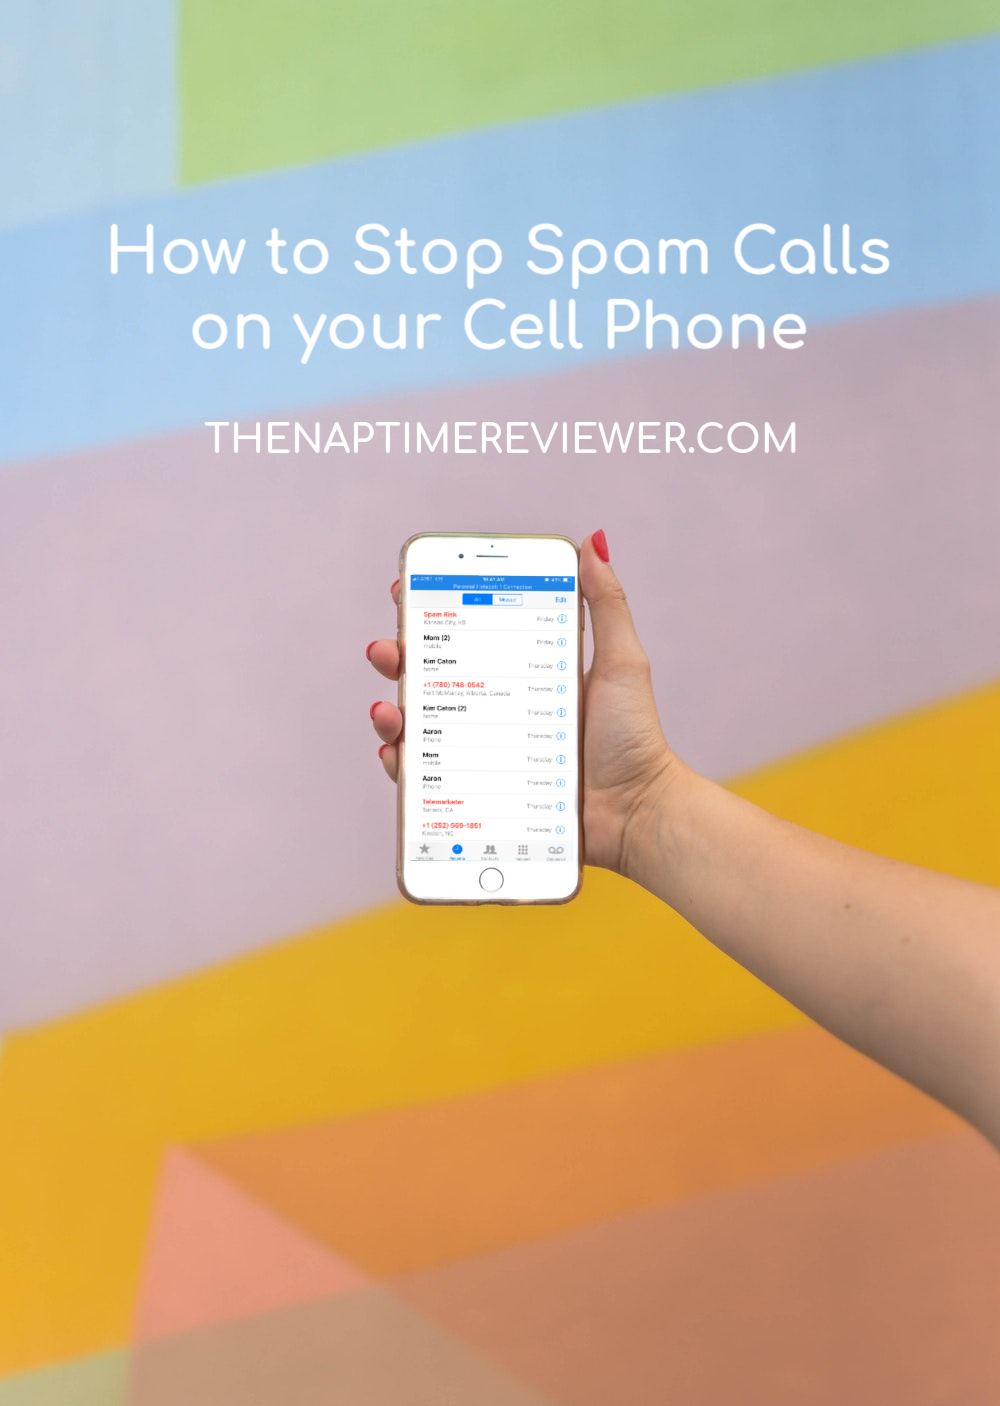 How to stop spam calls on your cell phone.